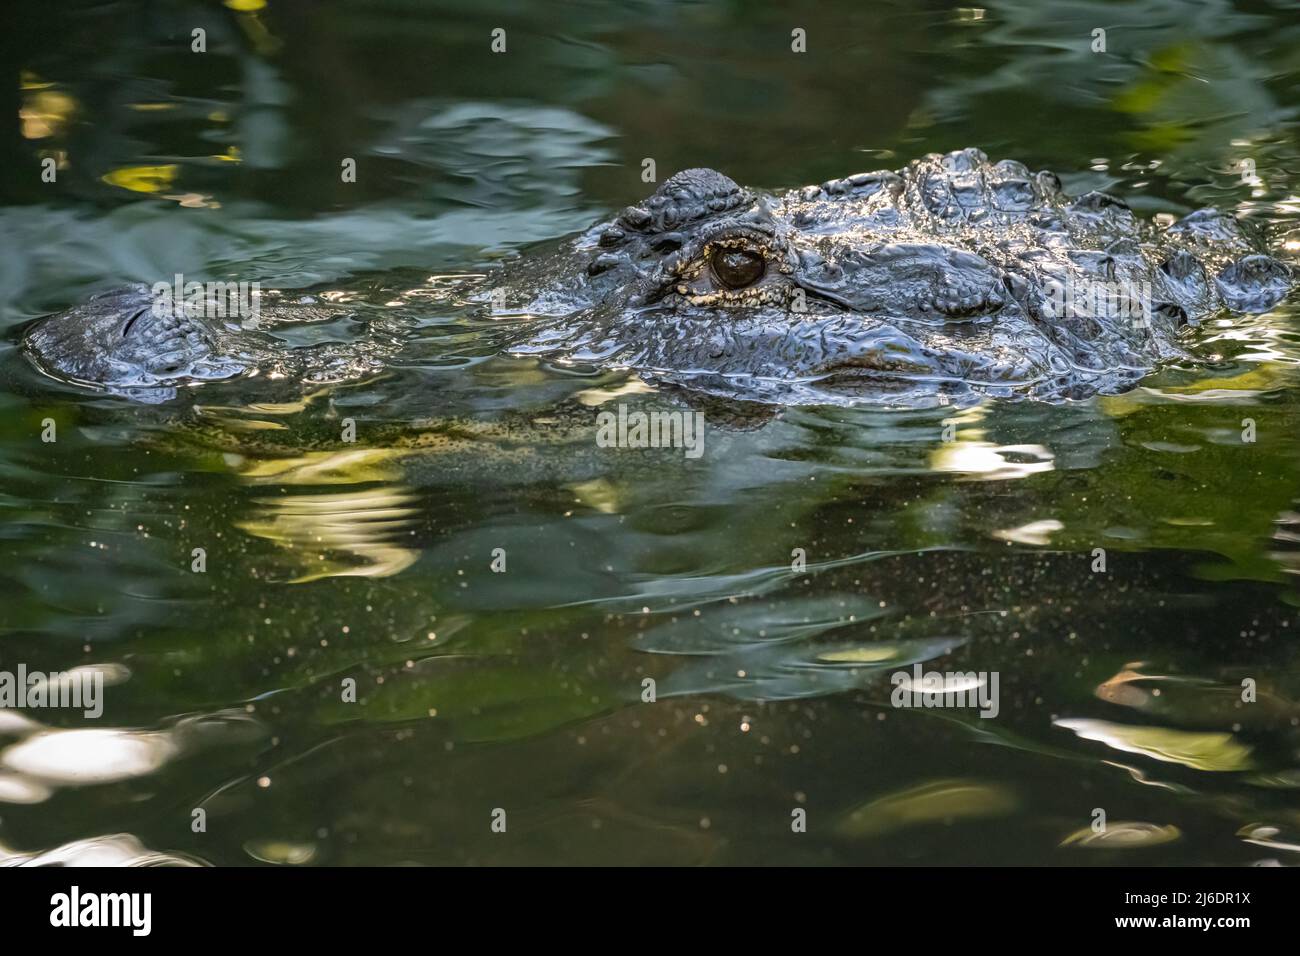 American alligator (Alligator mississippiensis) peering above the water in St. Augustine, Florida. (USA) Stock Photo